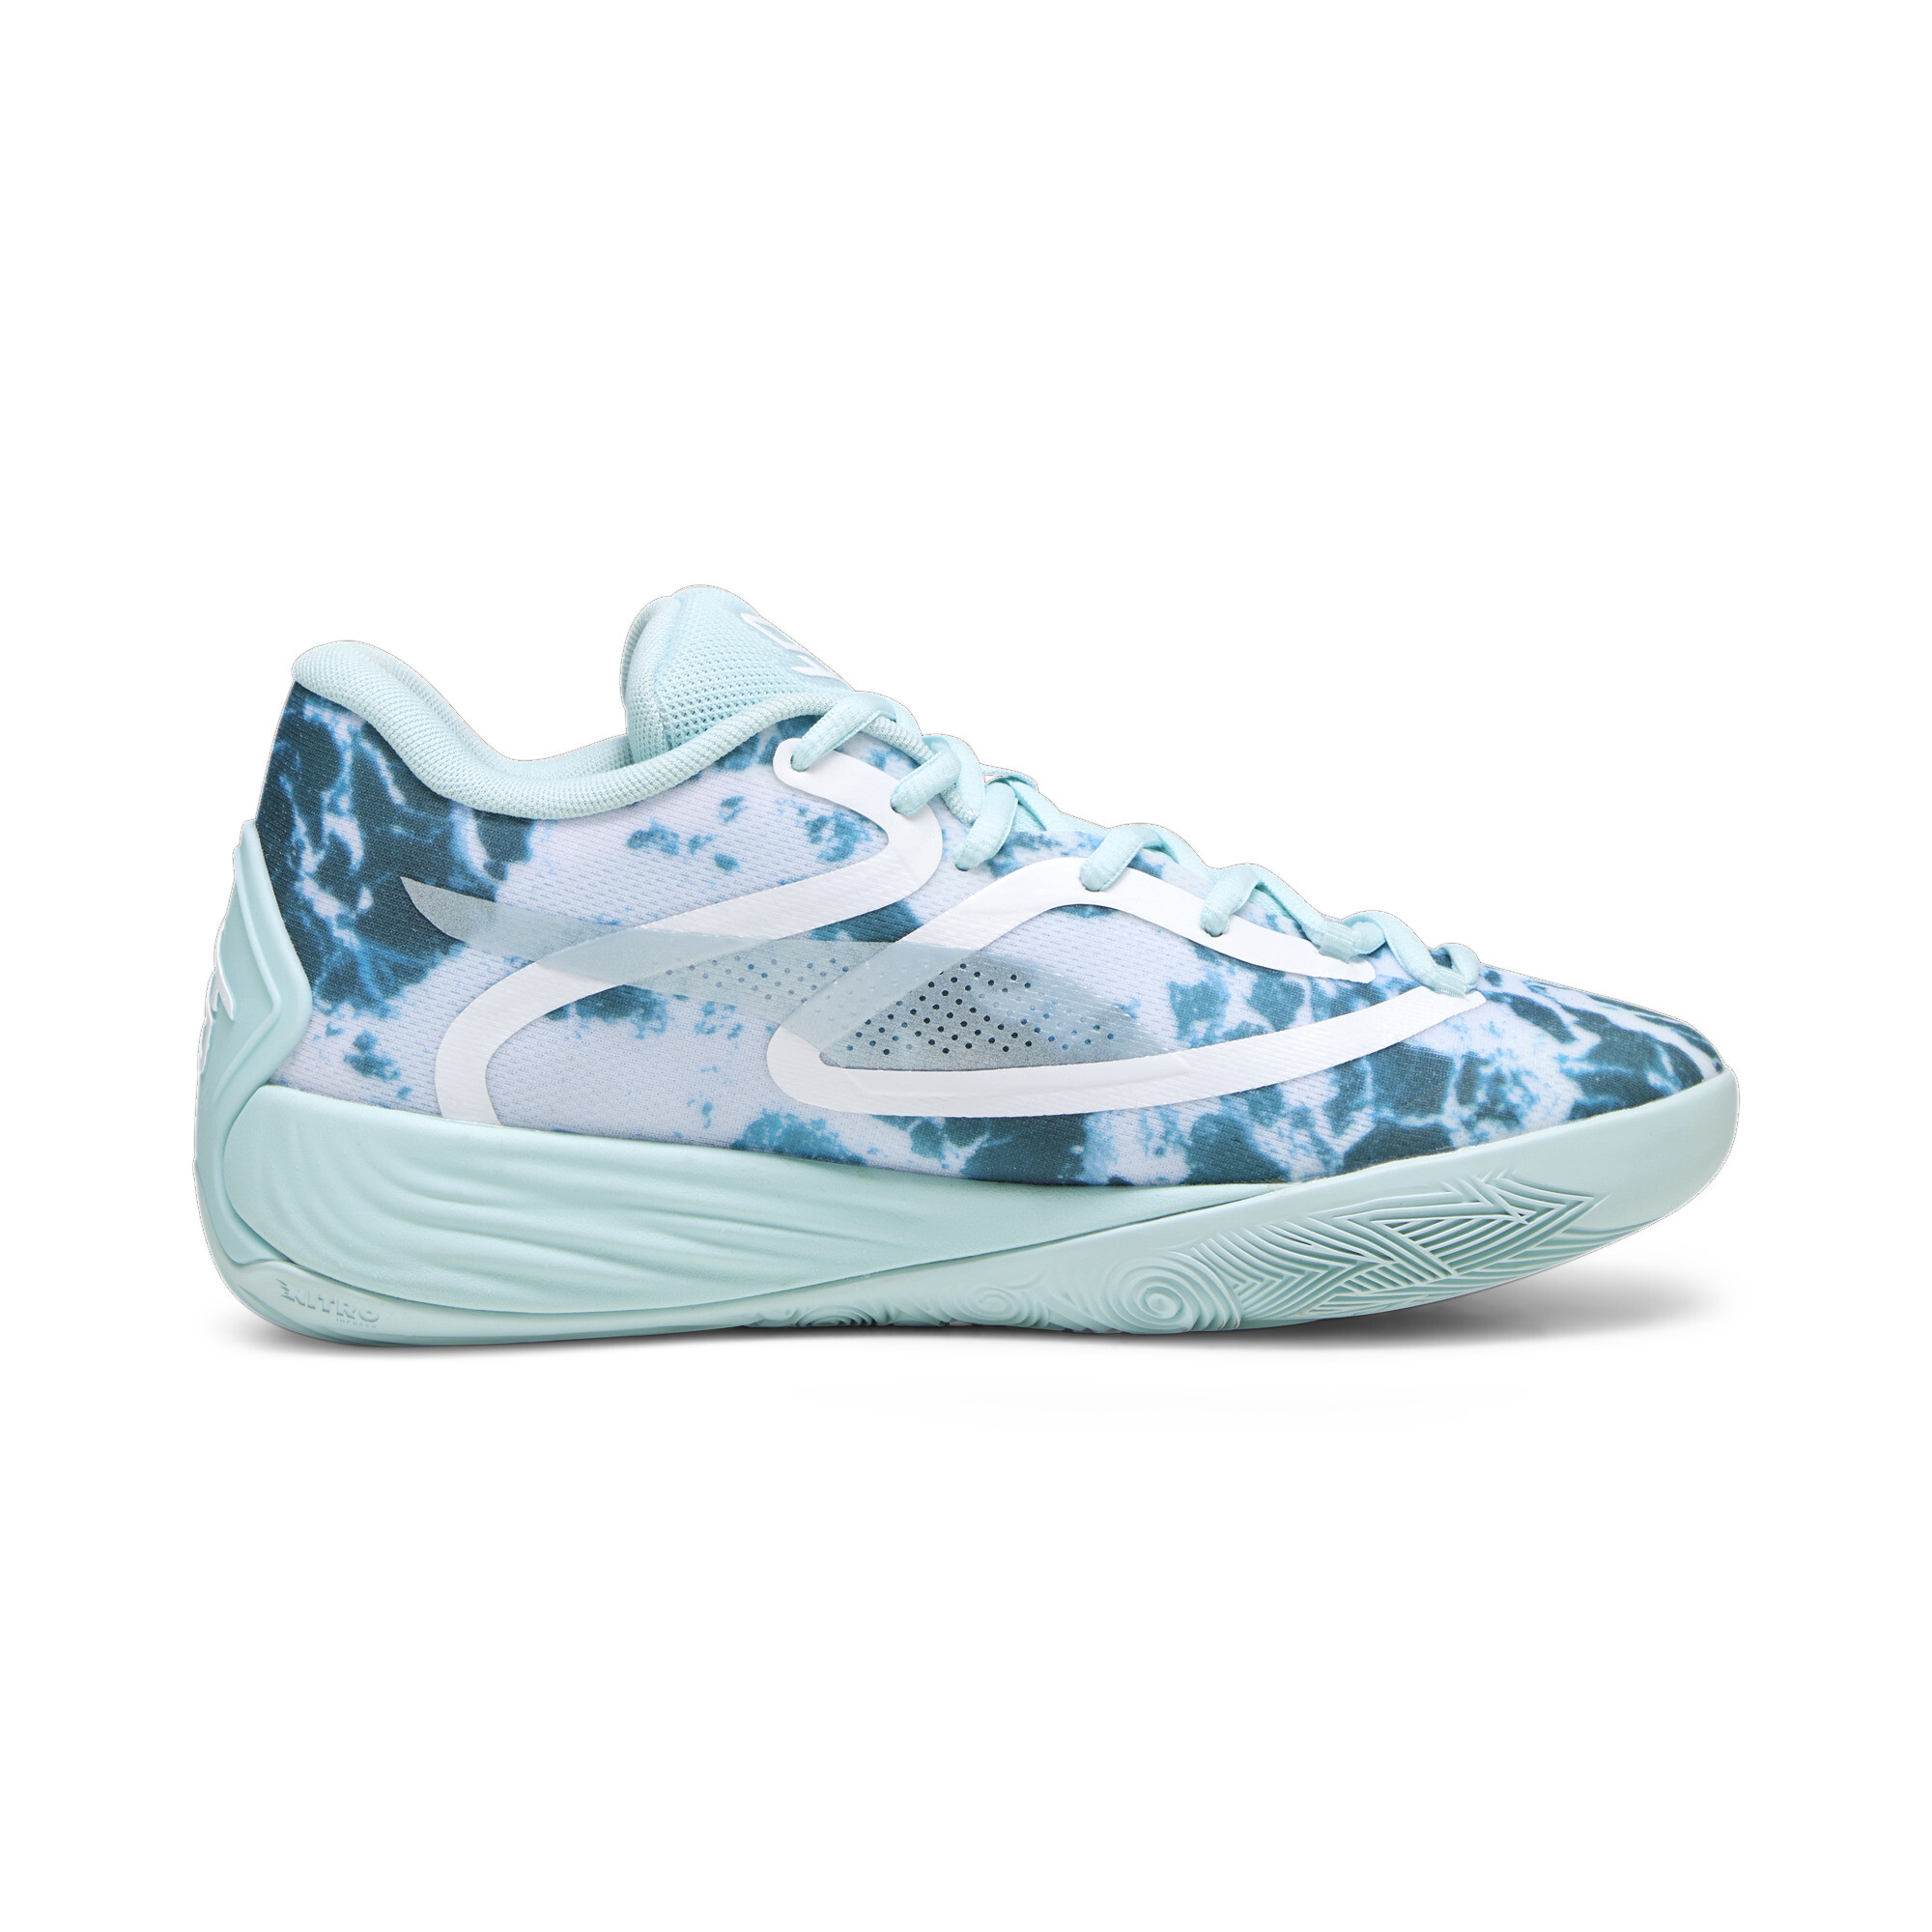 Women's Puma Stewie 2 Water's Basketball Shoes, Blue, Size 38, Shoes